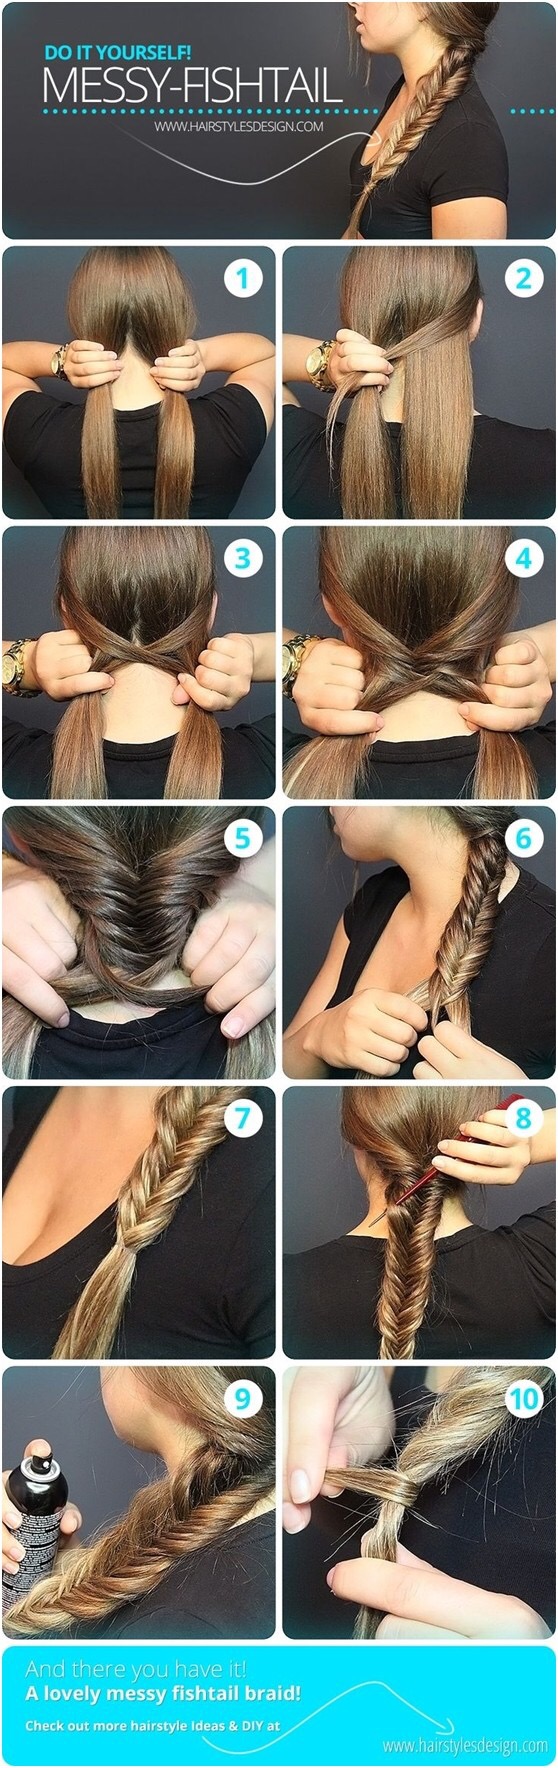 top 10 perfect hairstyles for fishing & camping | the catch